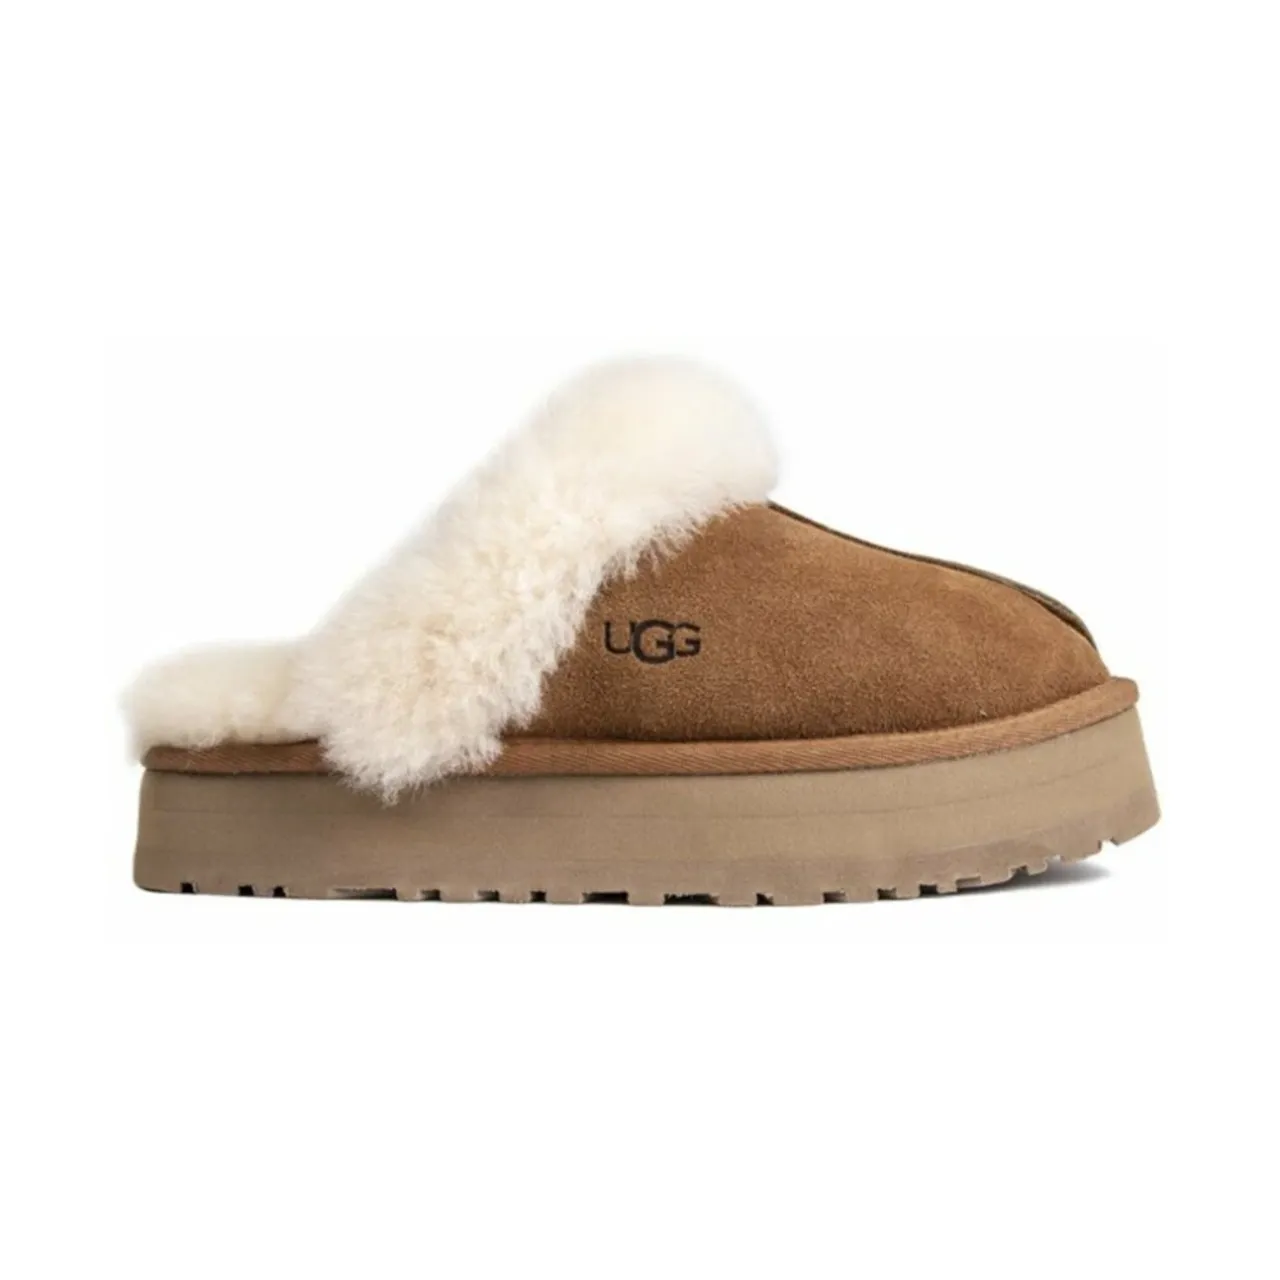 UGG , Disquette Slippers ,Brown female, Sizes: